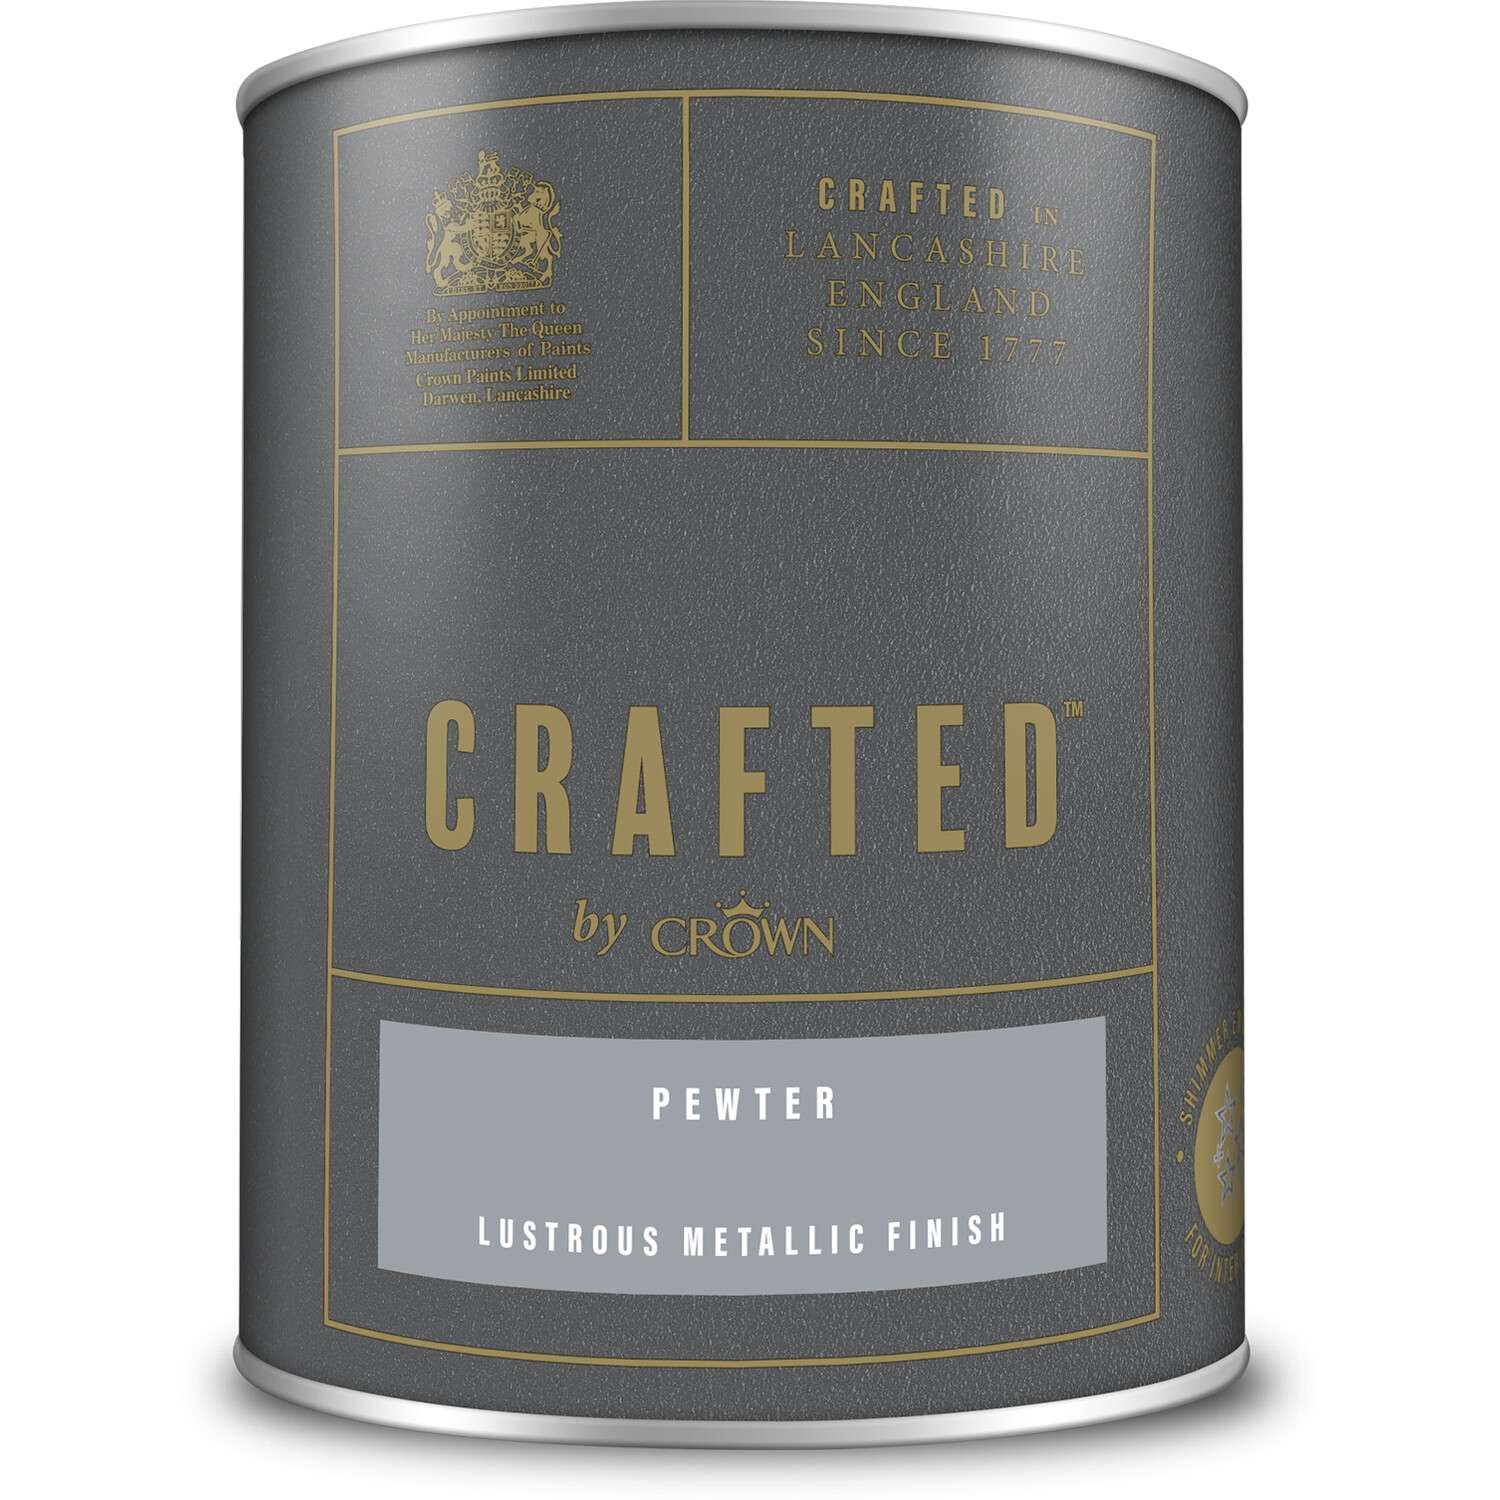 Crown Crafted Walls Wood and Metal Pewter Lustrous Metallic Shimmer Emulsion Paint 1.25L Image 2